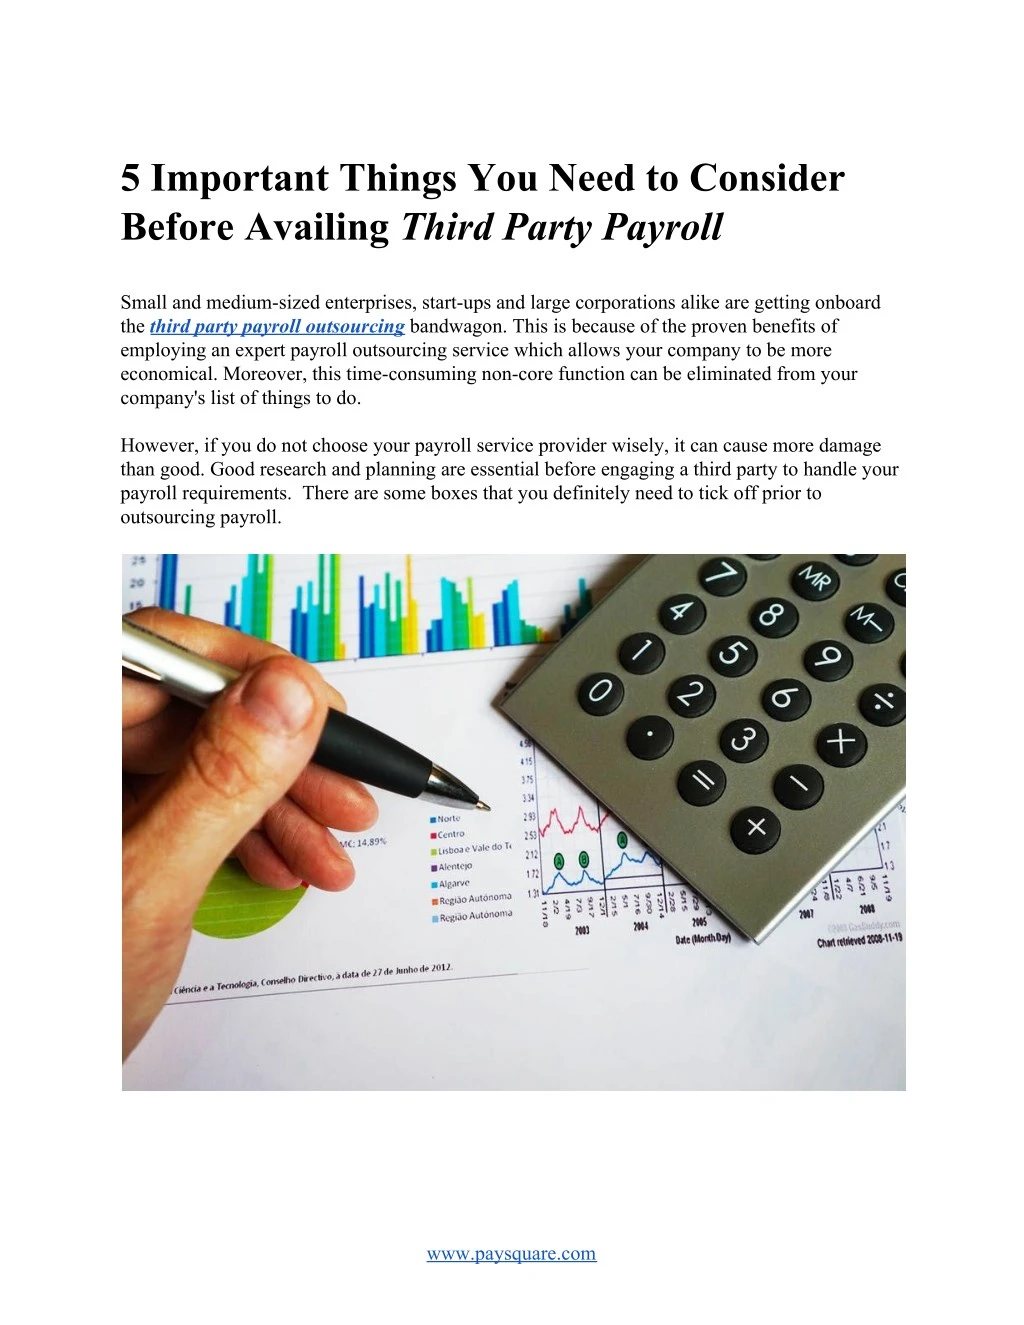 5 important things you need to consider before